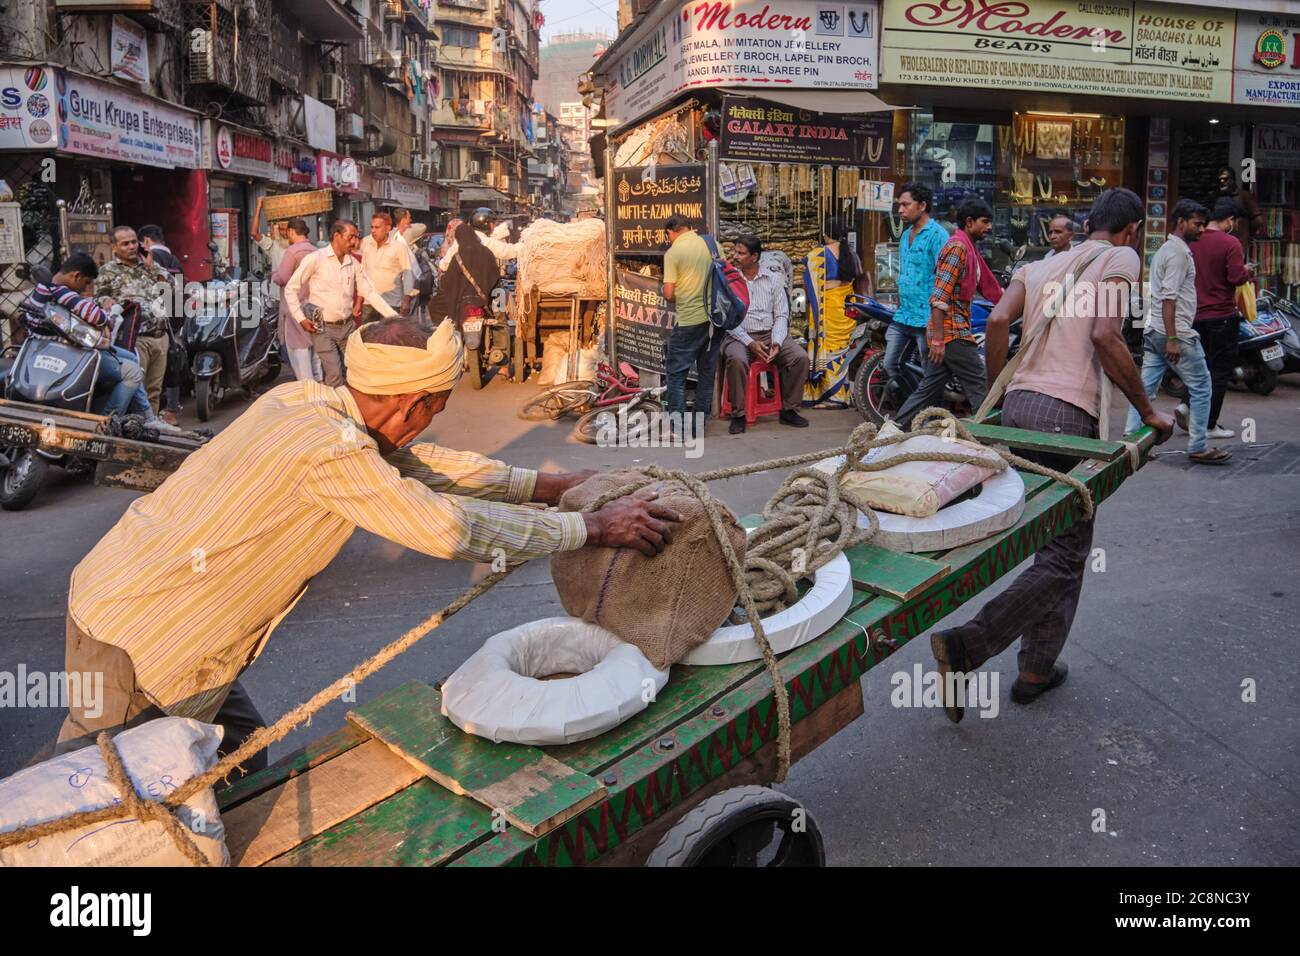 Two men steer a handcart through busy Kalbadevi Rd. in Bhuleshwar, Mumbai, India, handcarts being the most used mode for goods transport in the area Stock Photo